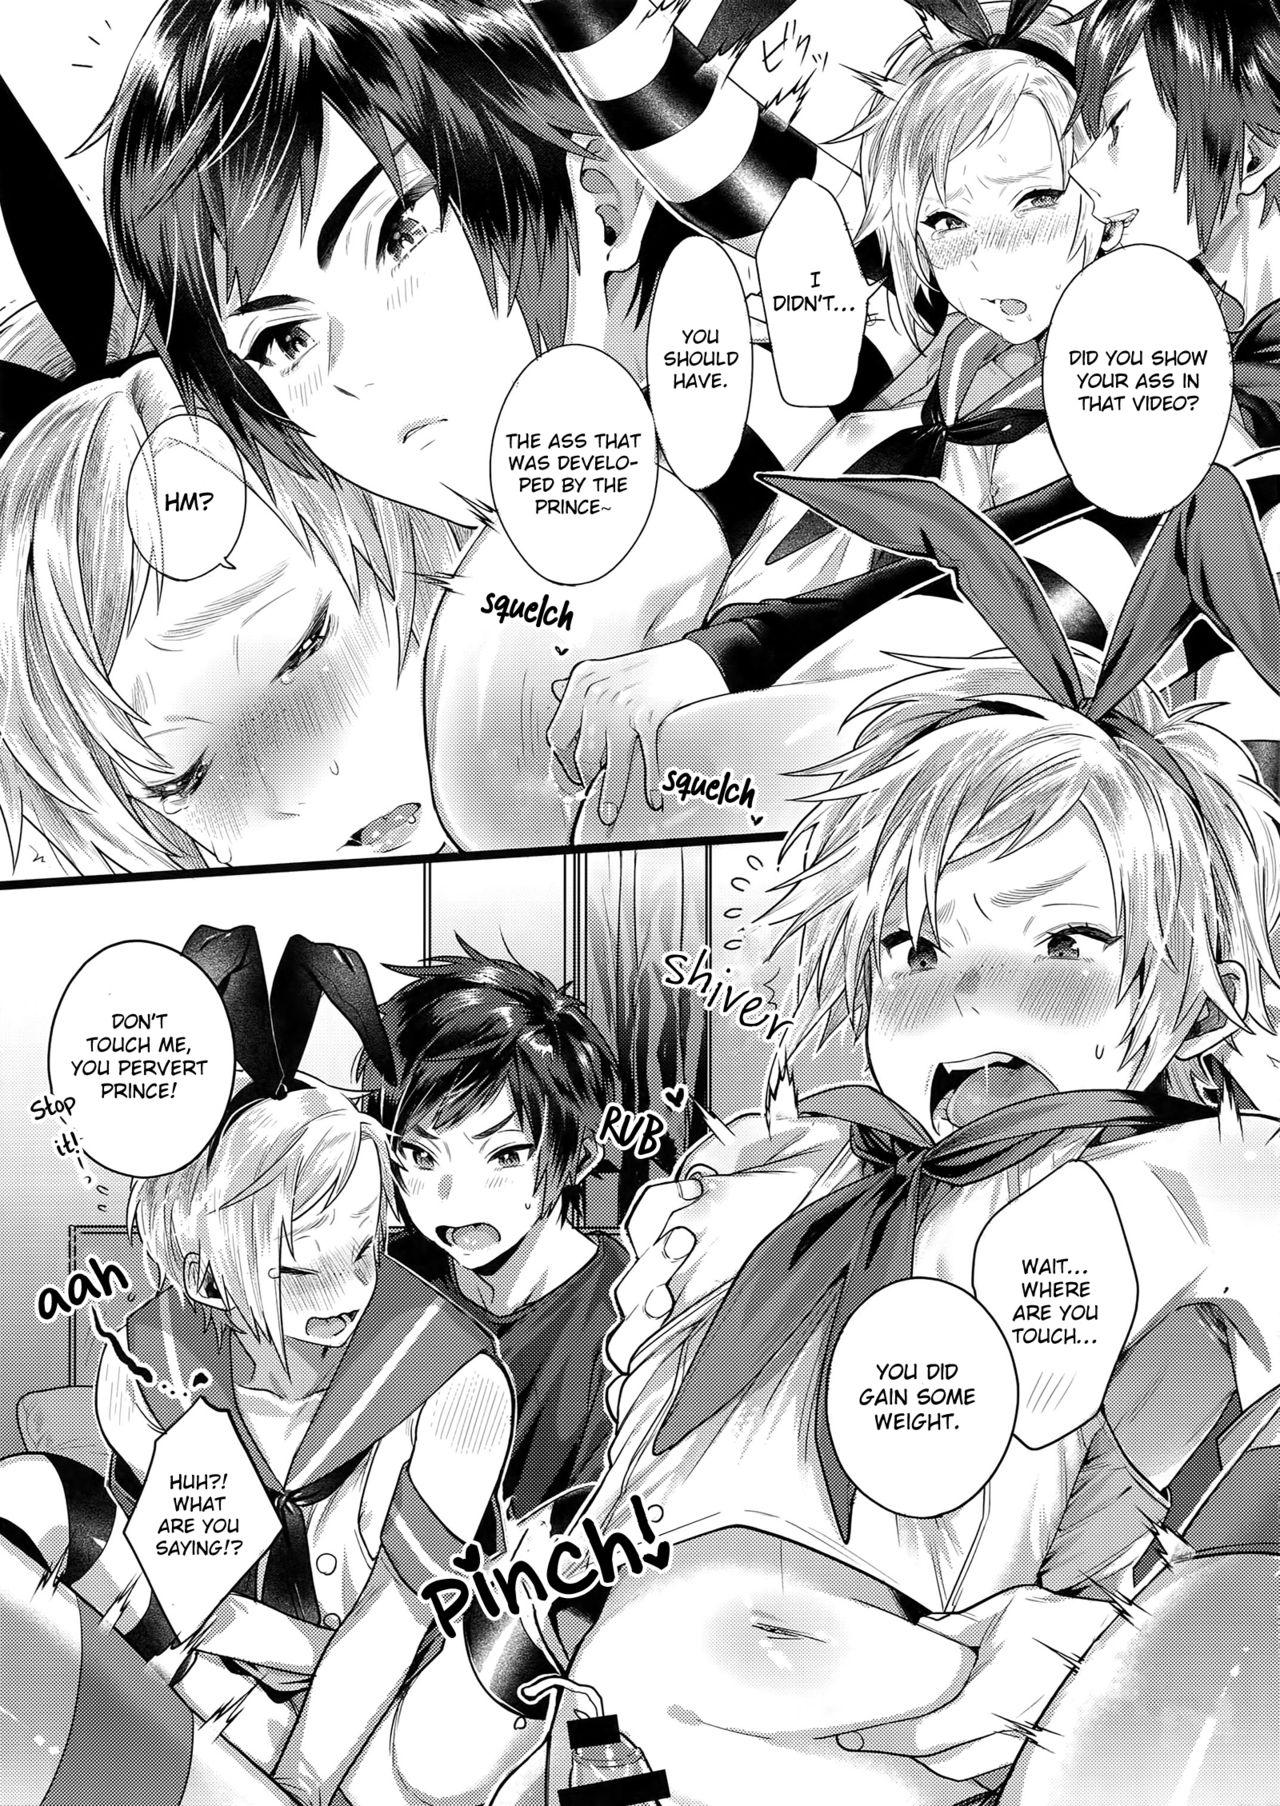 Naked Taikei Iji no Shudan | Prompto Argentum-kun's Means For Maintaining His Body Shape! - Kantai collection Final fantasy xv Casal - Page 8